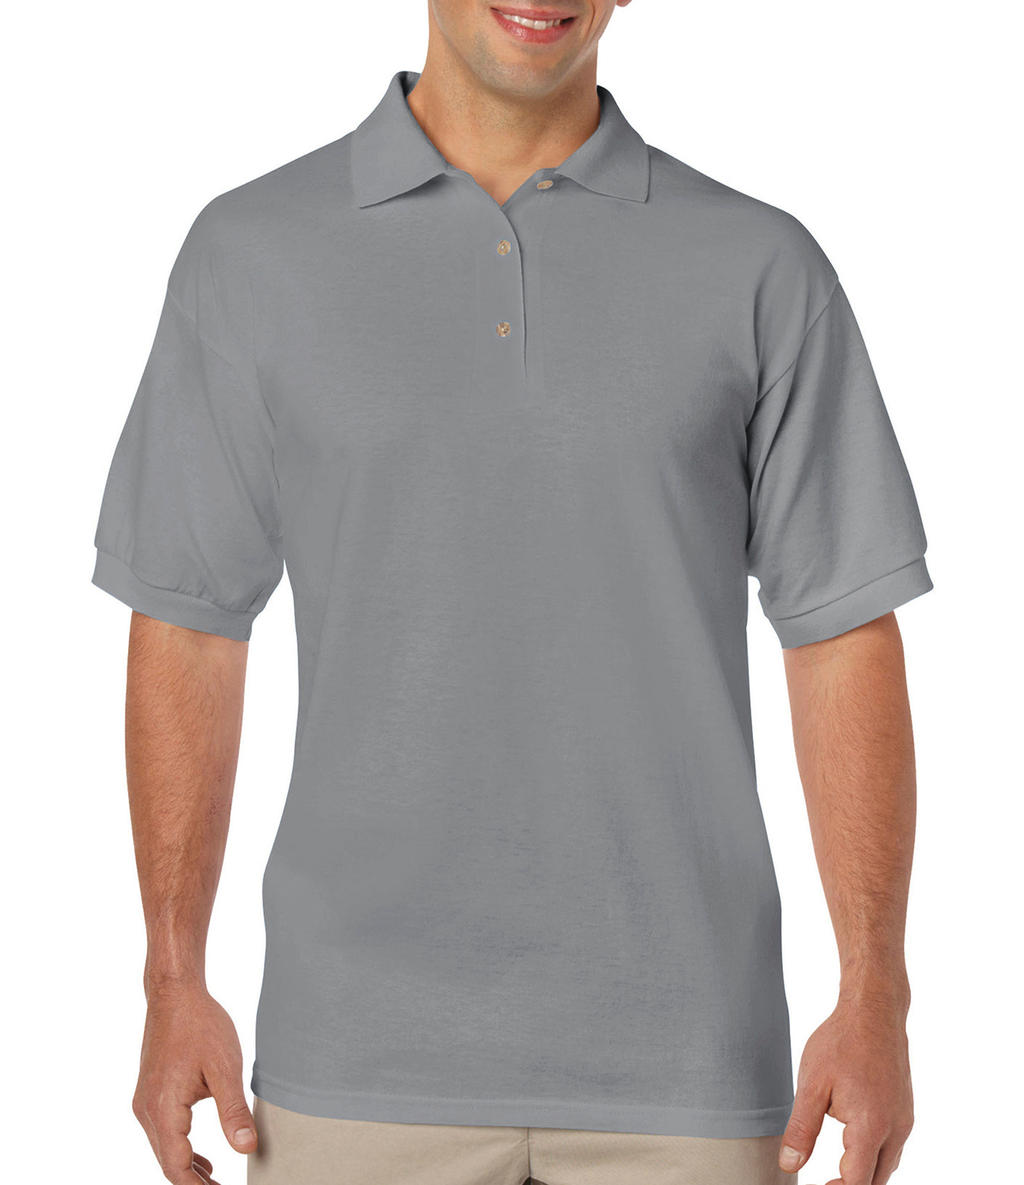  DryBlend Adult Jersey Polo in Farbe Gravel